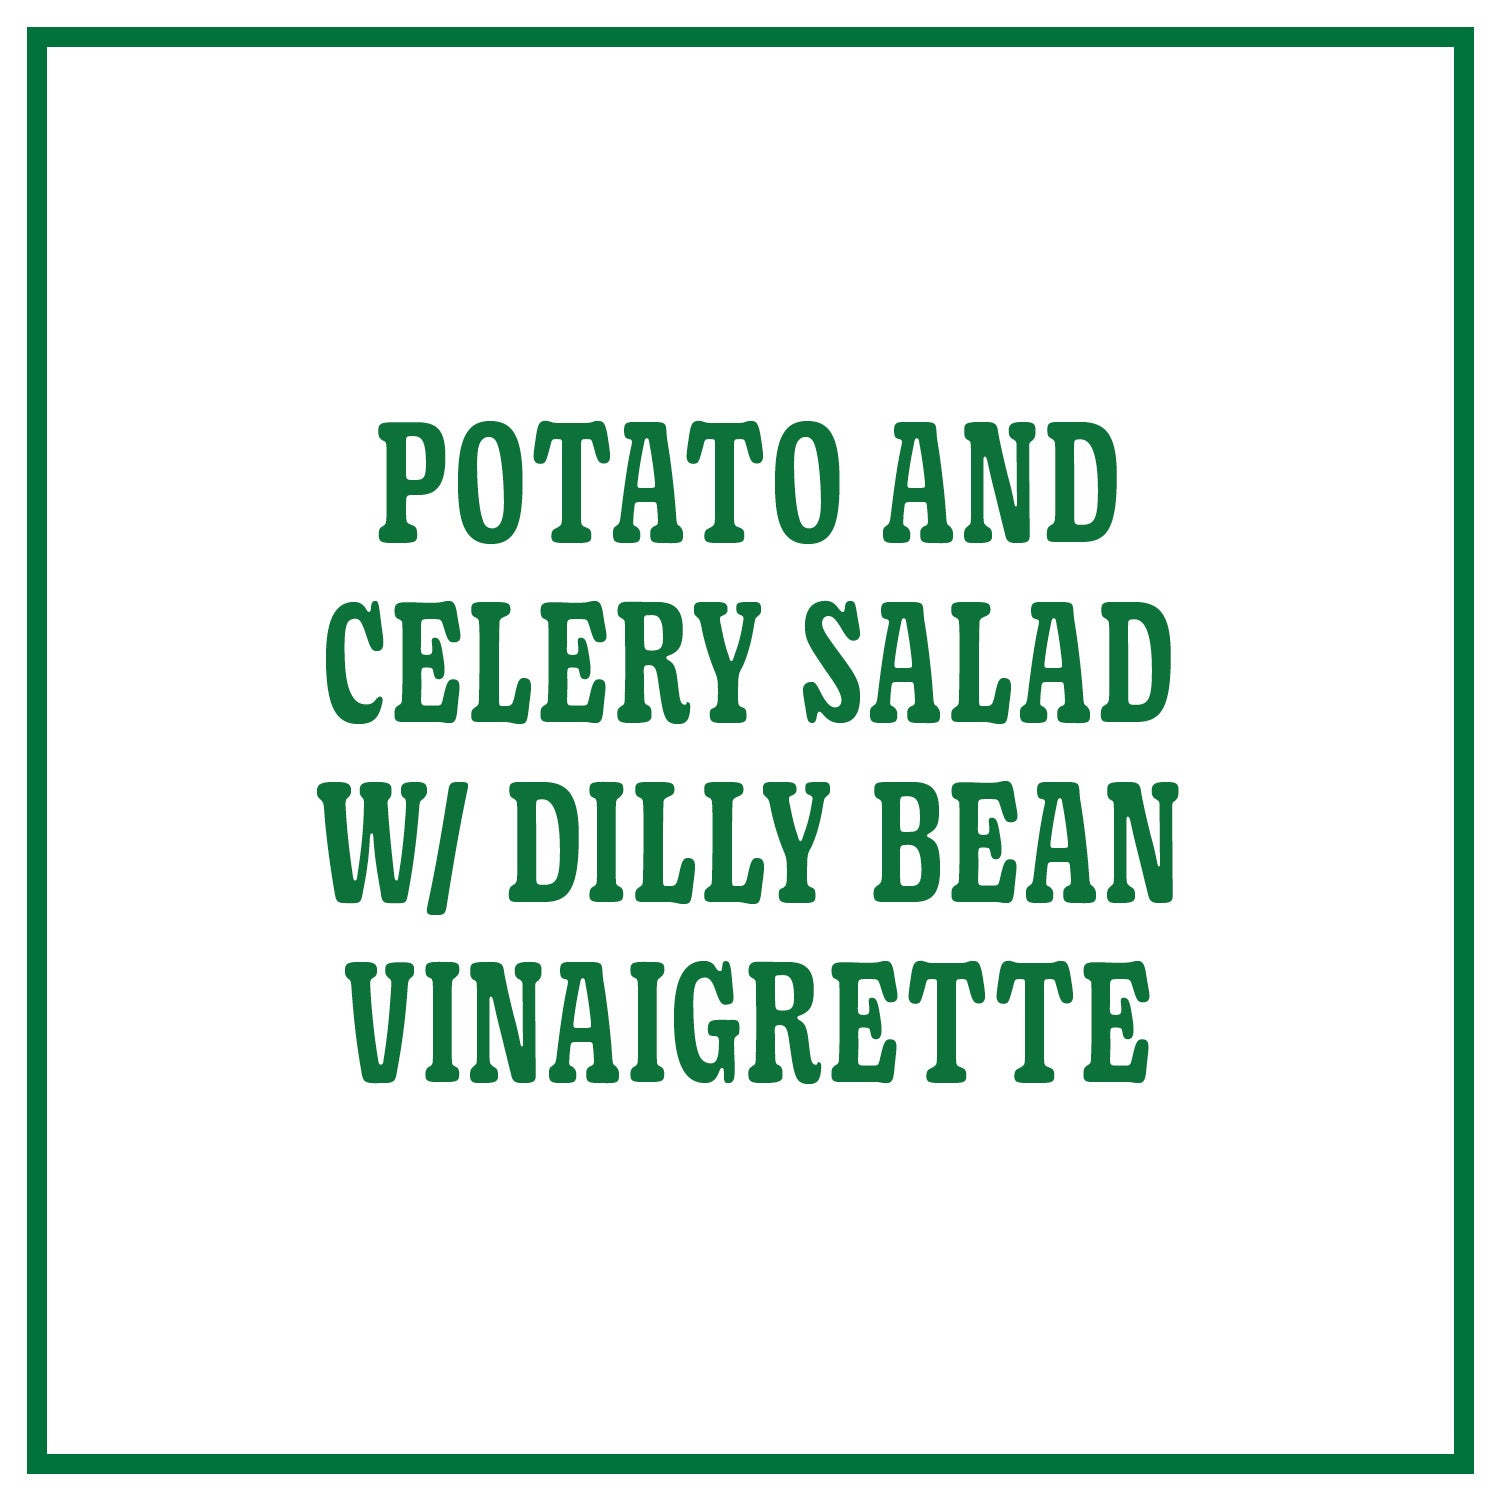 Potato and Celery Salad with Dilly Bean Vinaigrette